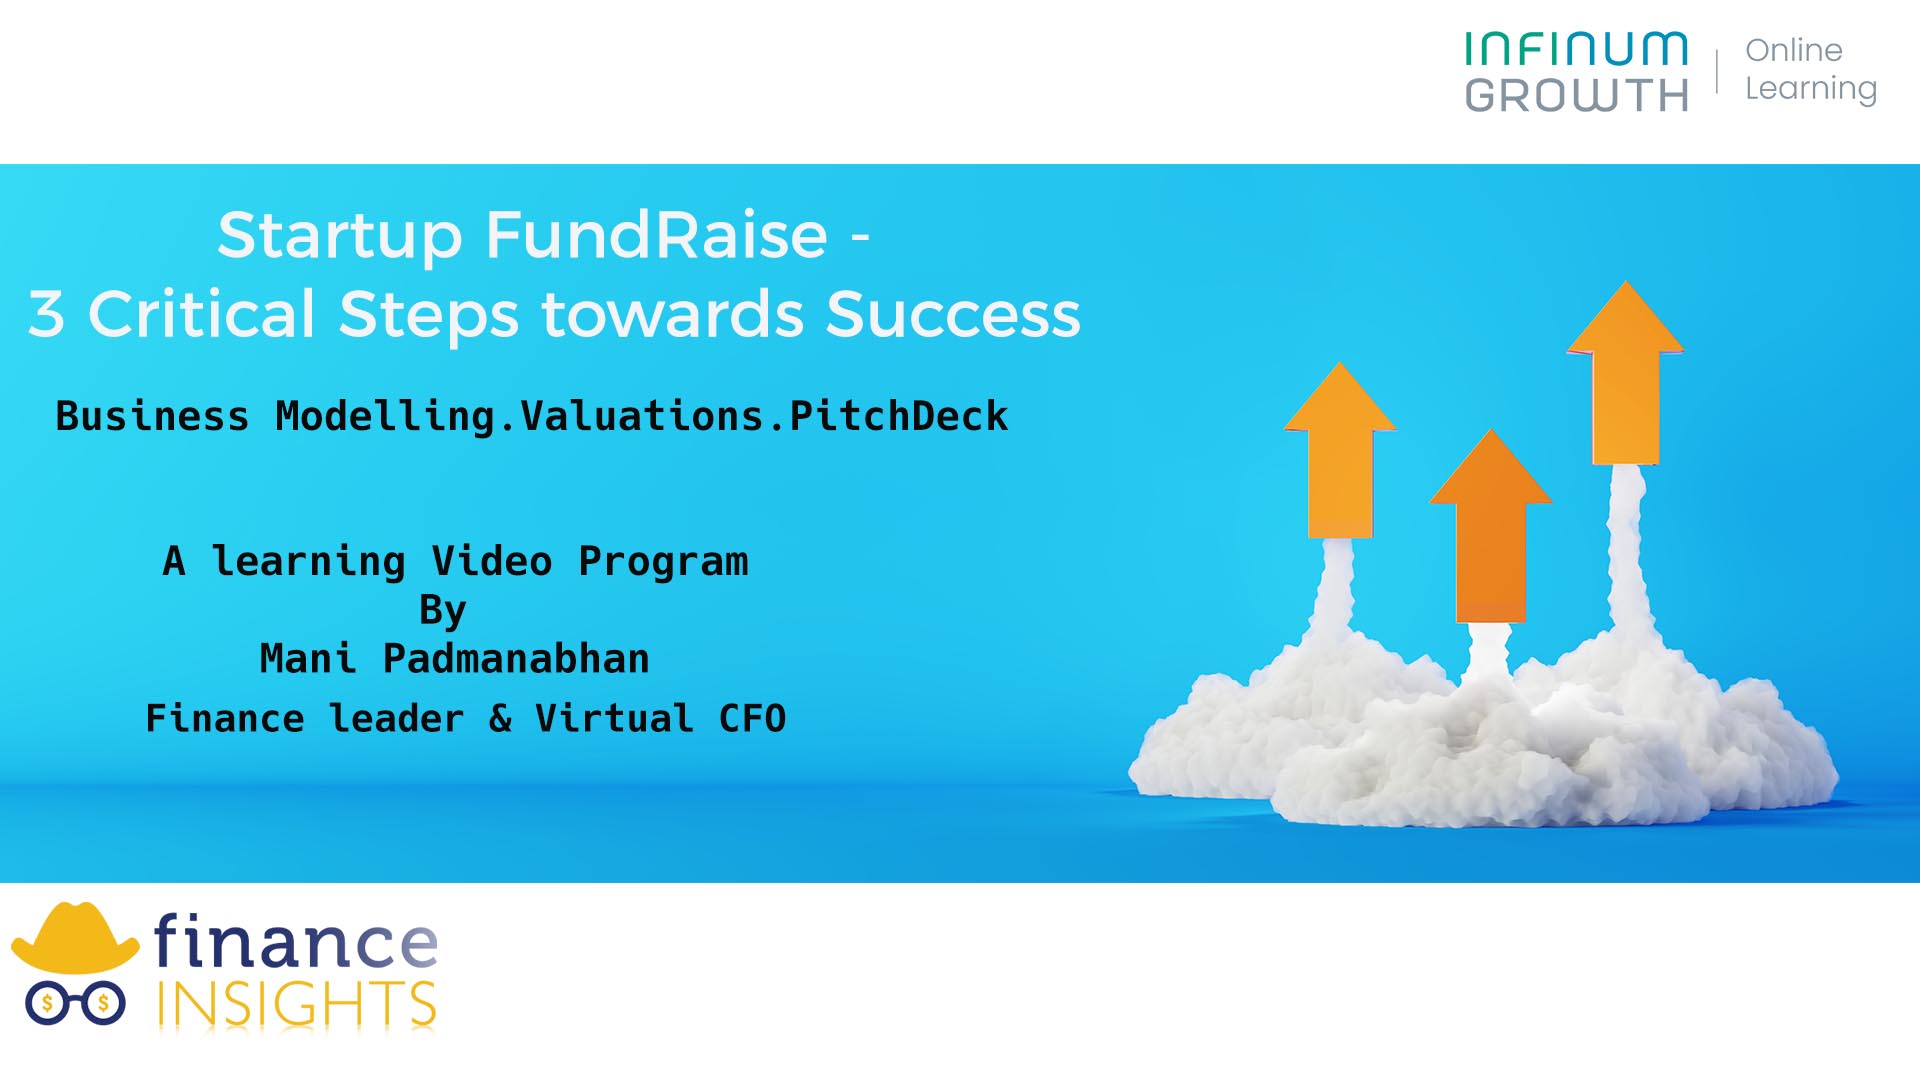 Startup FundRaise: 3 Critical Steps towards Success